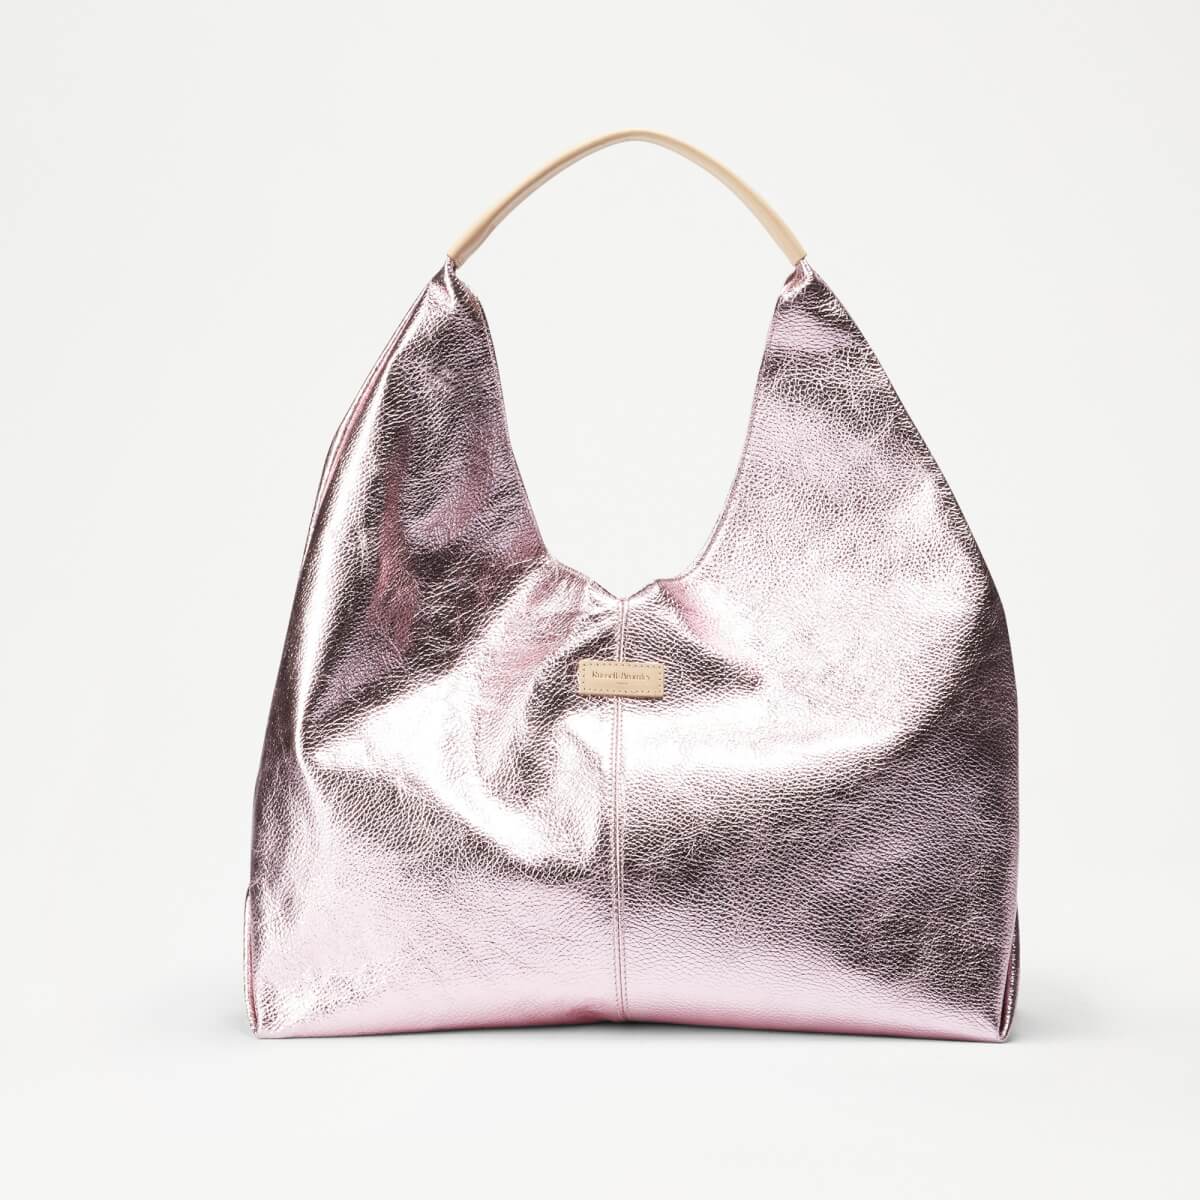 Russell & Bromley Women's Pink Leather Metallic Everything Oversized Shopper Bag, Size: 40x43x12cm